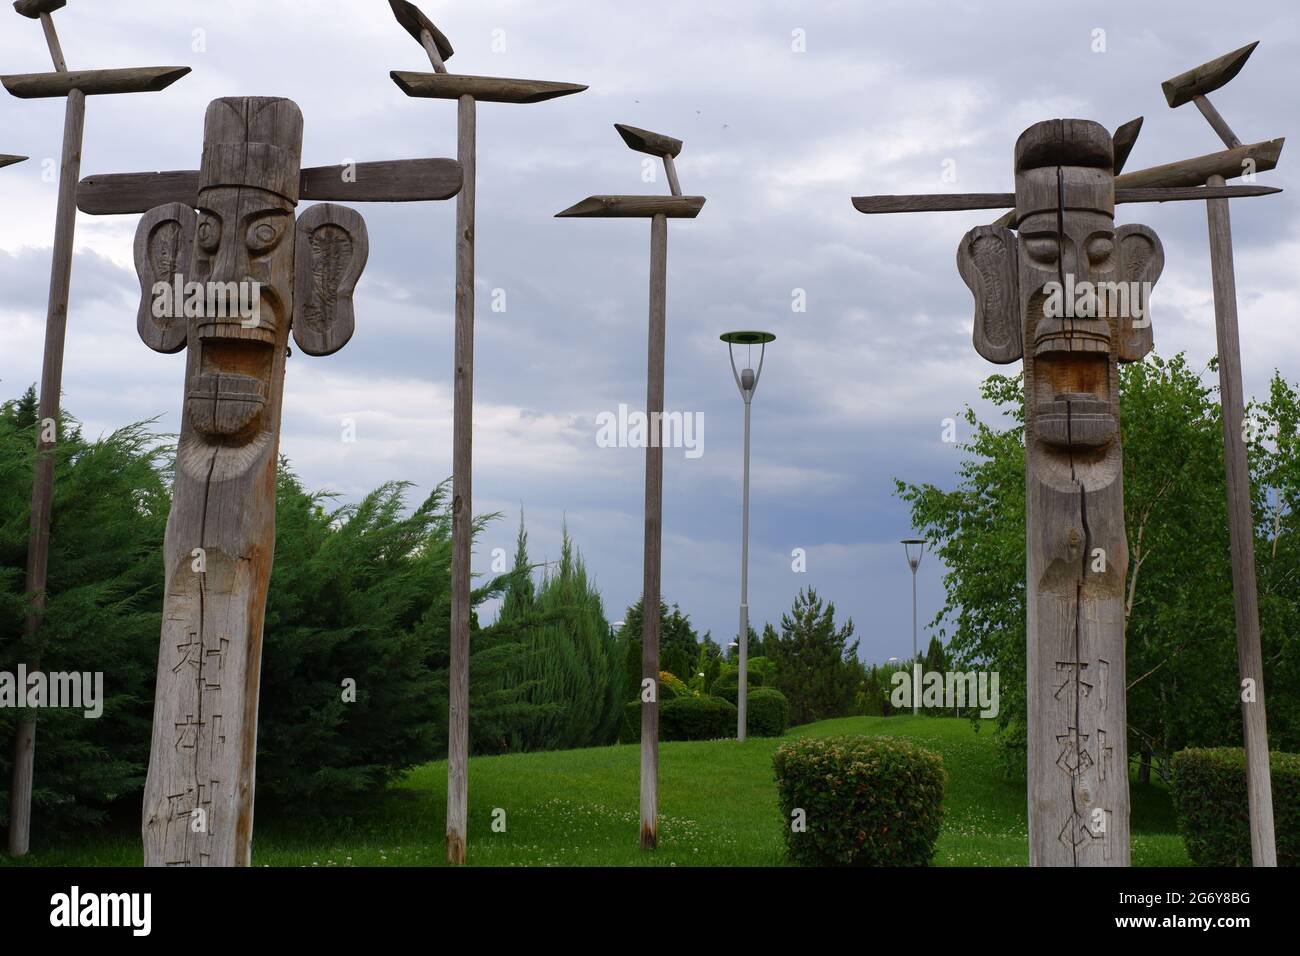 Jan-Seung and Sot-Dae Wood Sculptures at Entrance of a Park in Turkey Stock Photo